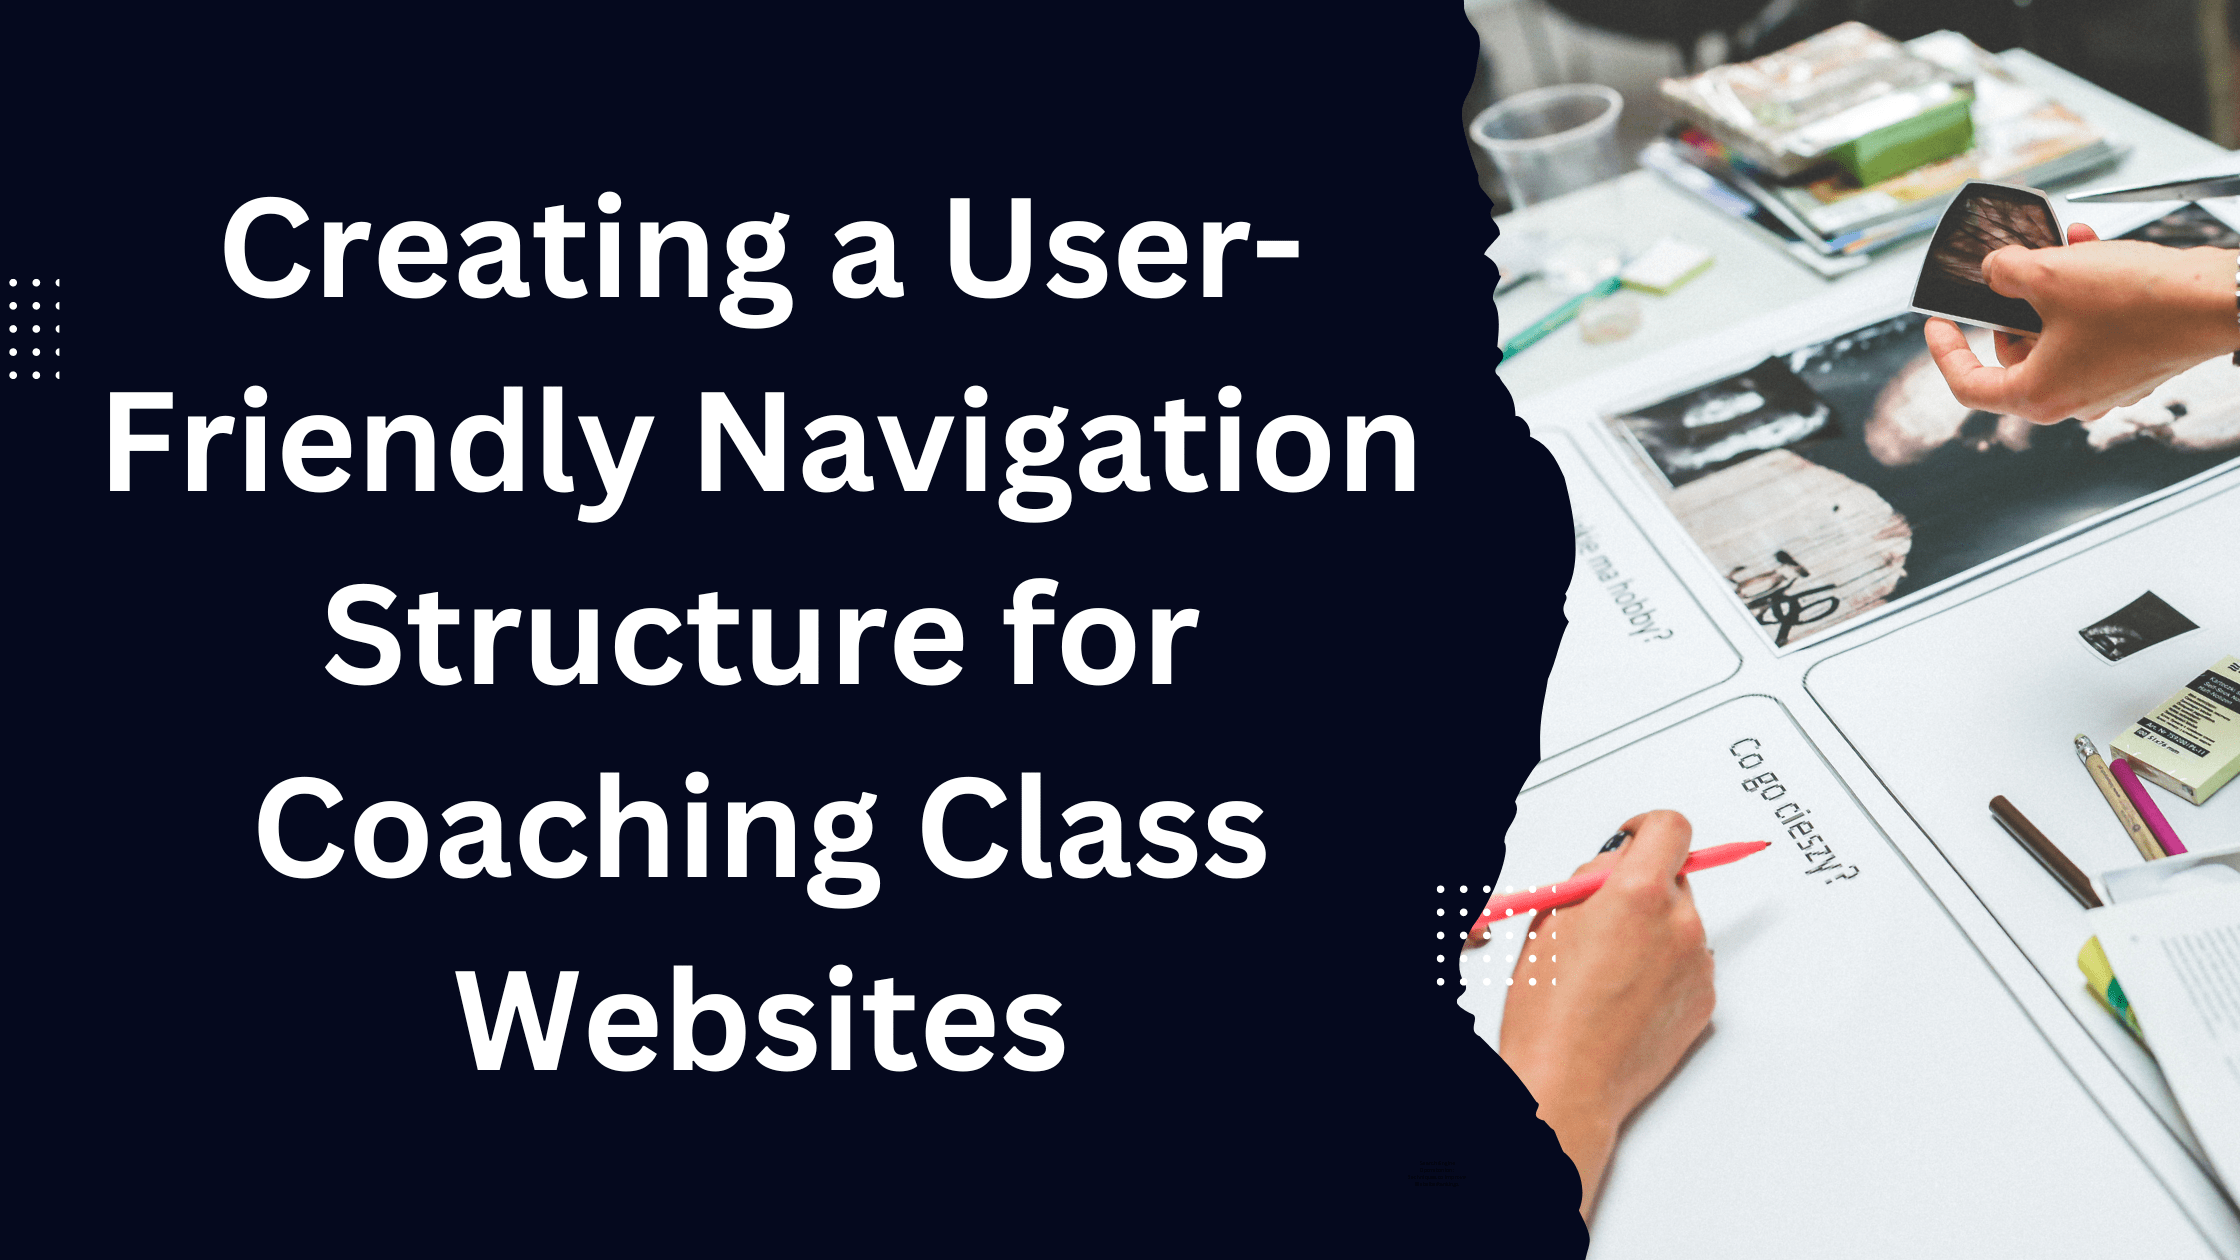 How do you structure a coaching website?